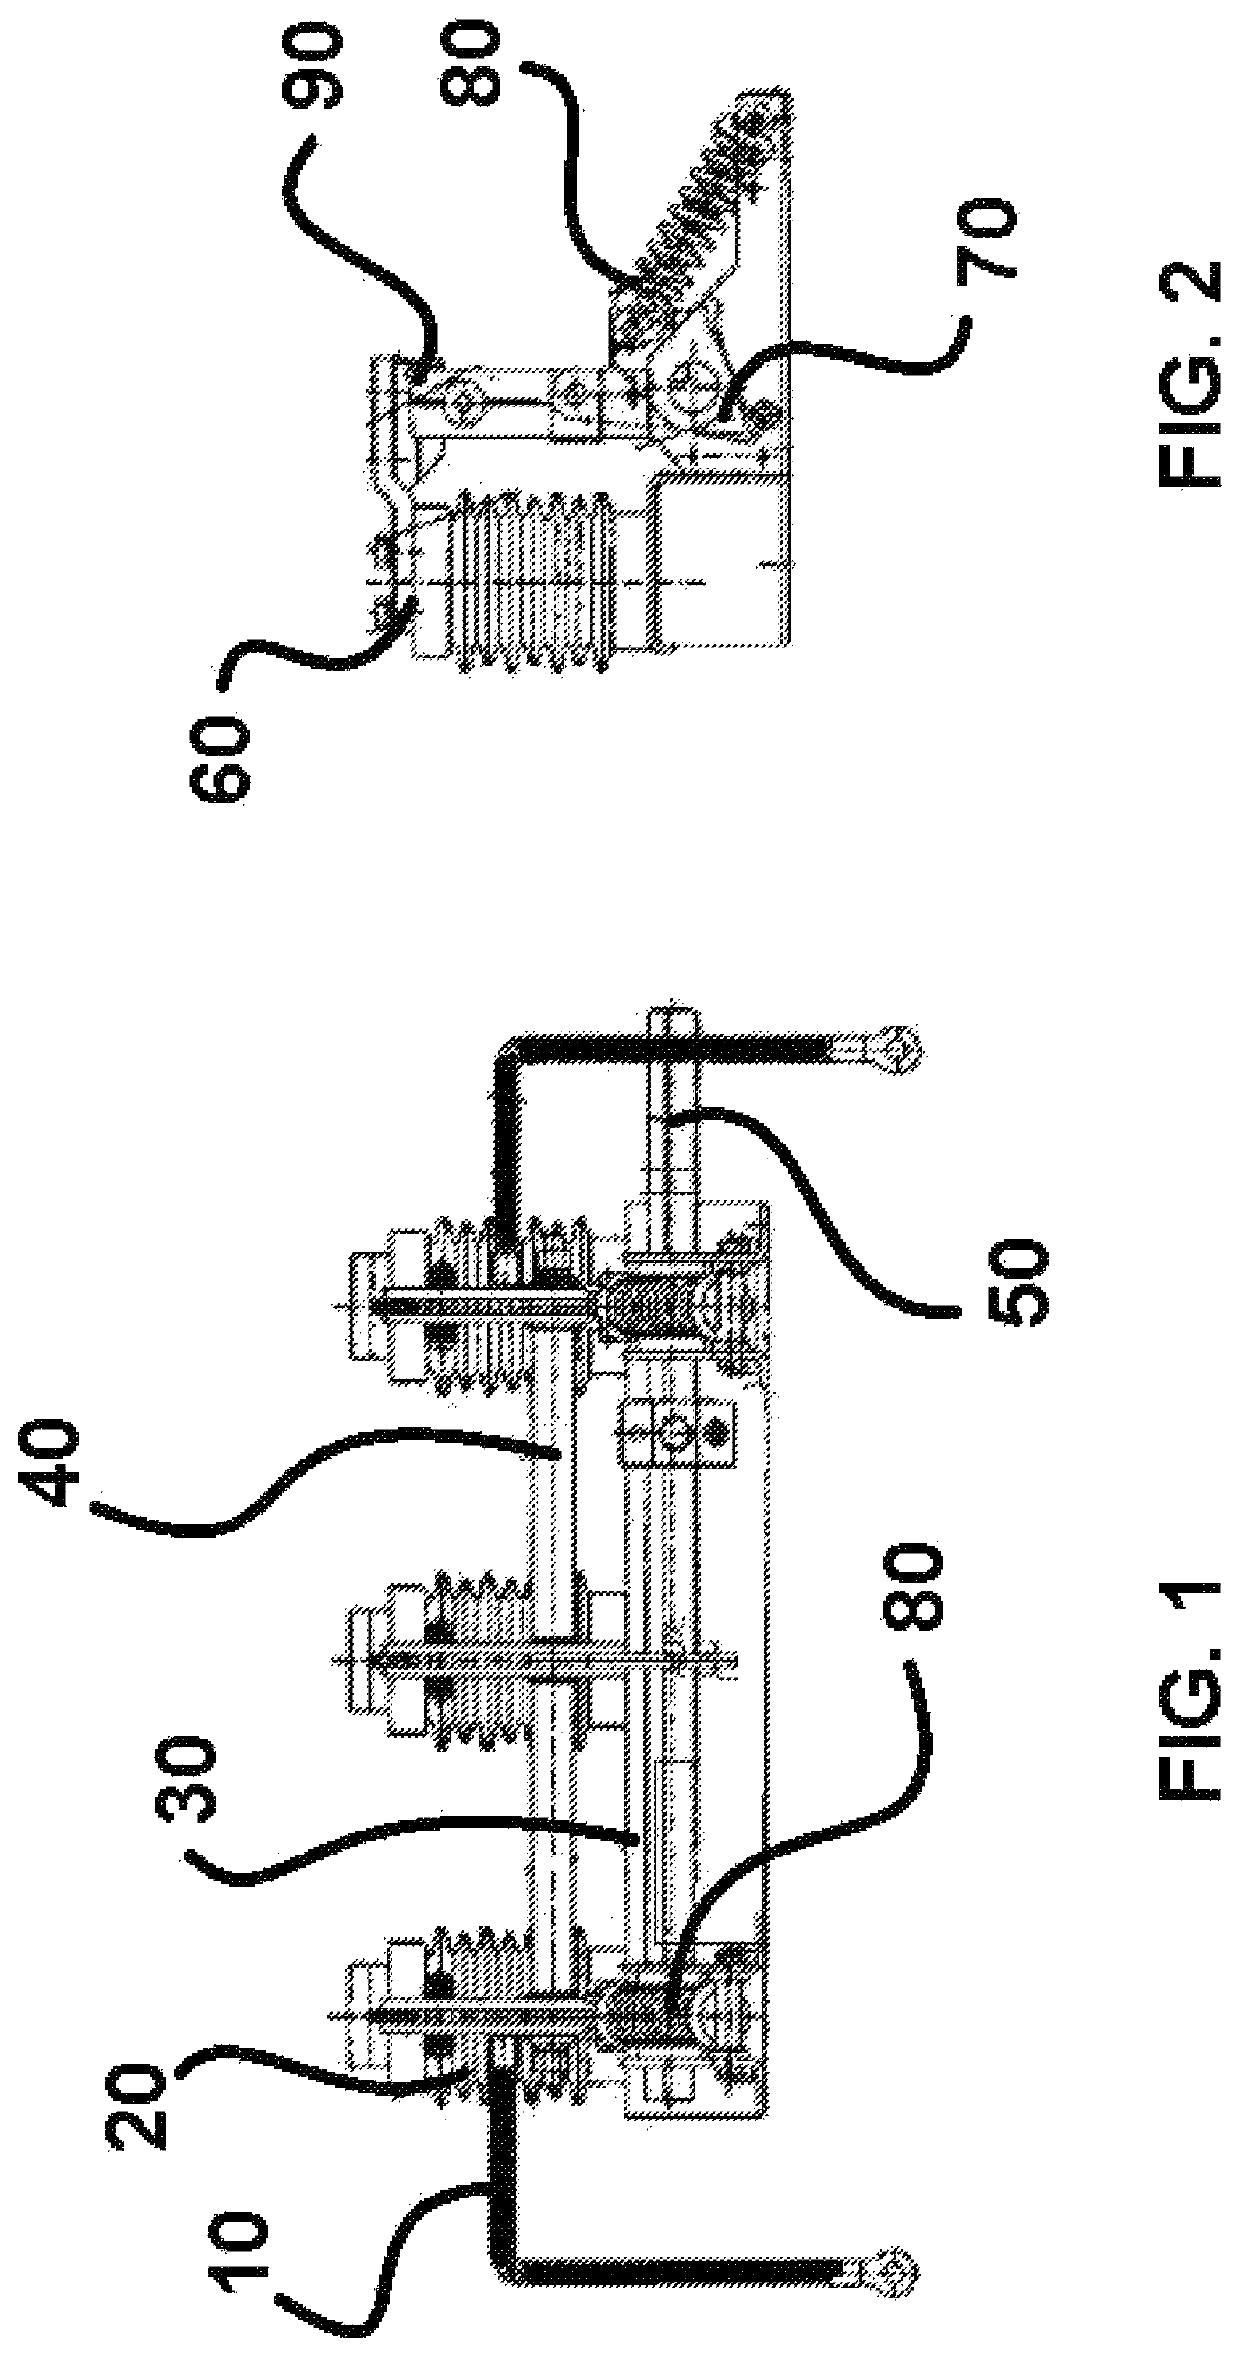 Grounding switch for use in metal-clad switchgear